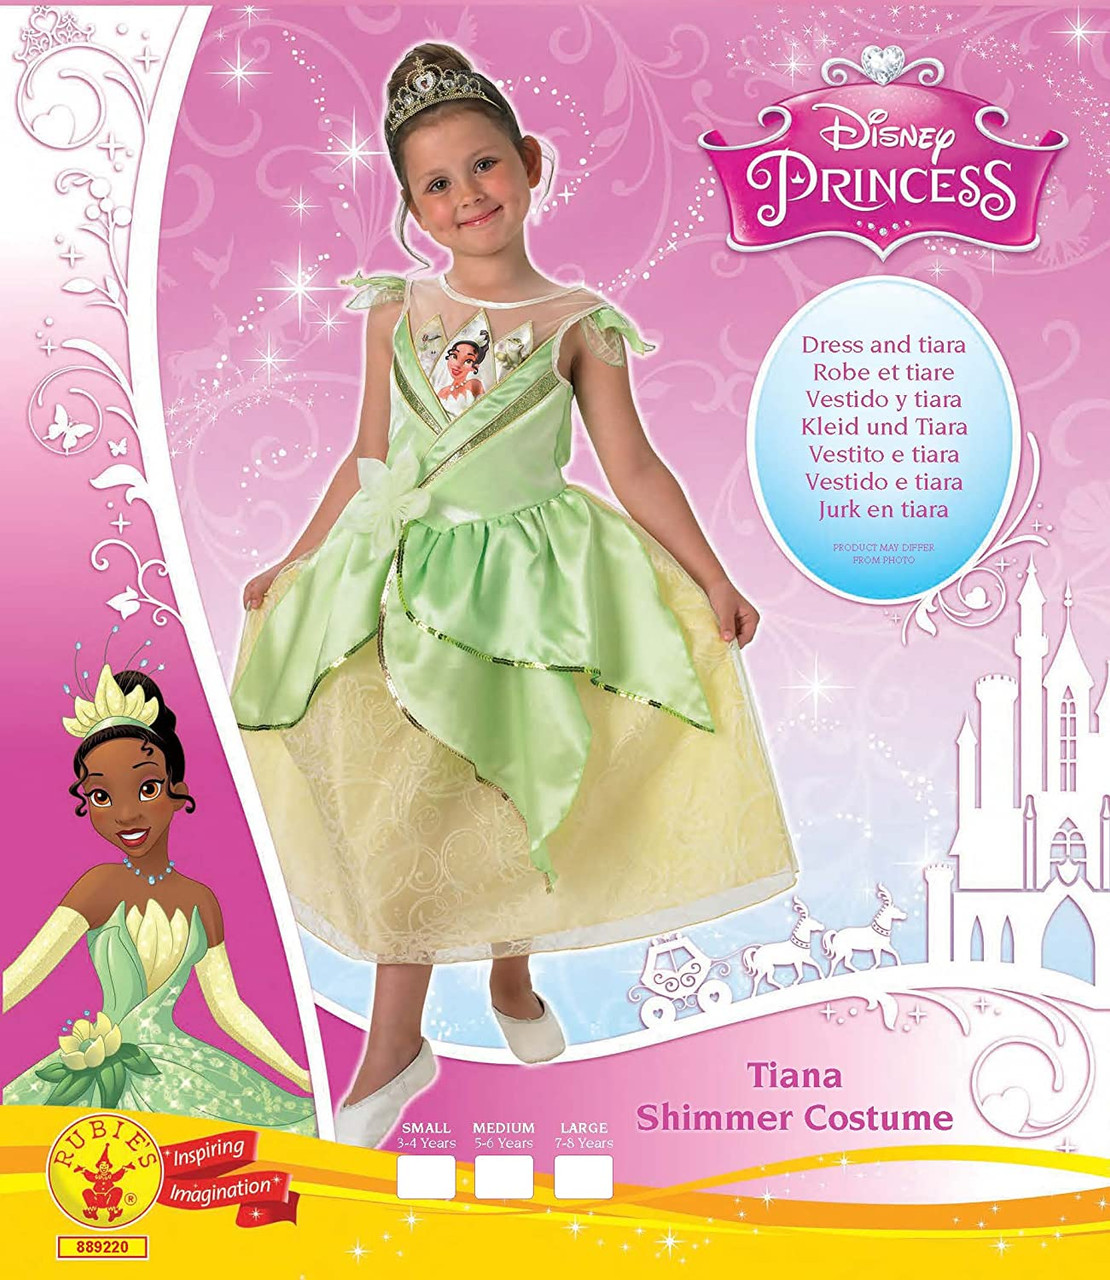 Disney Tiana Costume for Girls – The Princess and The Frog, Size 7/8 Green